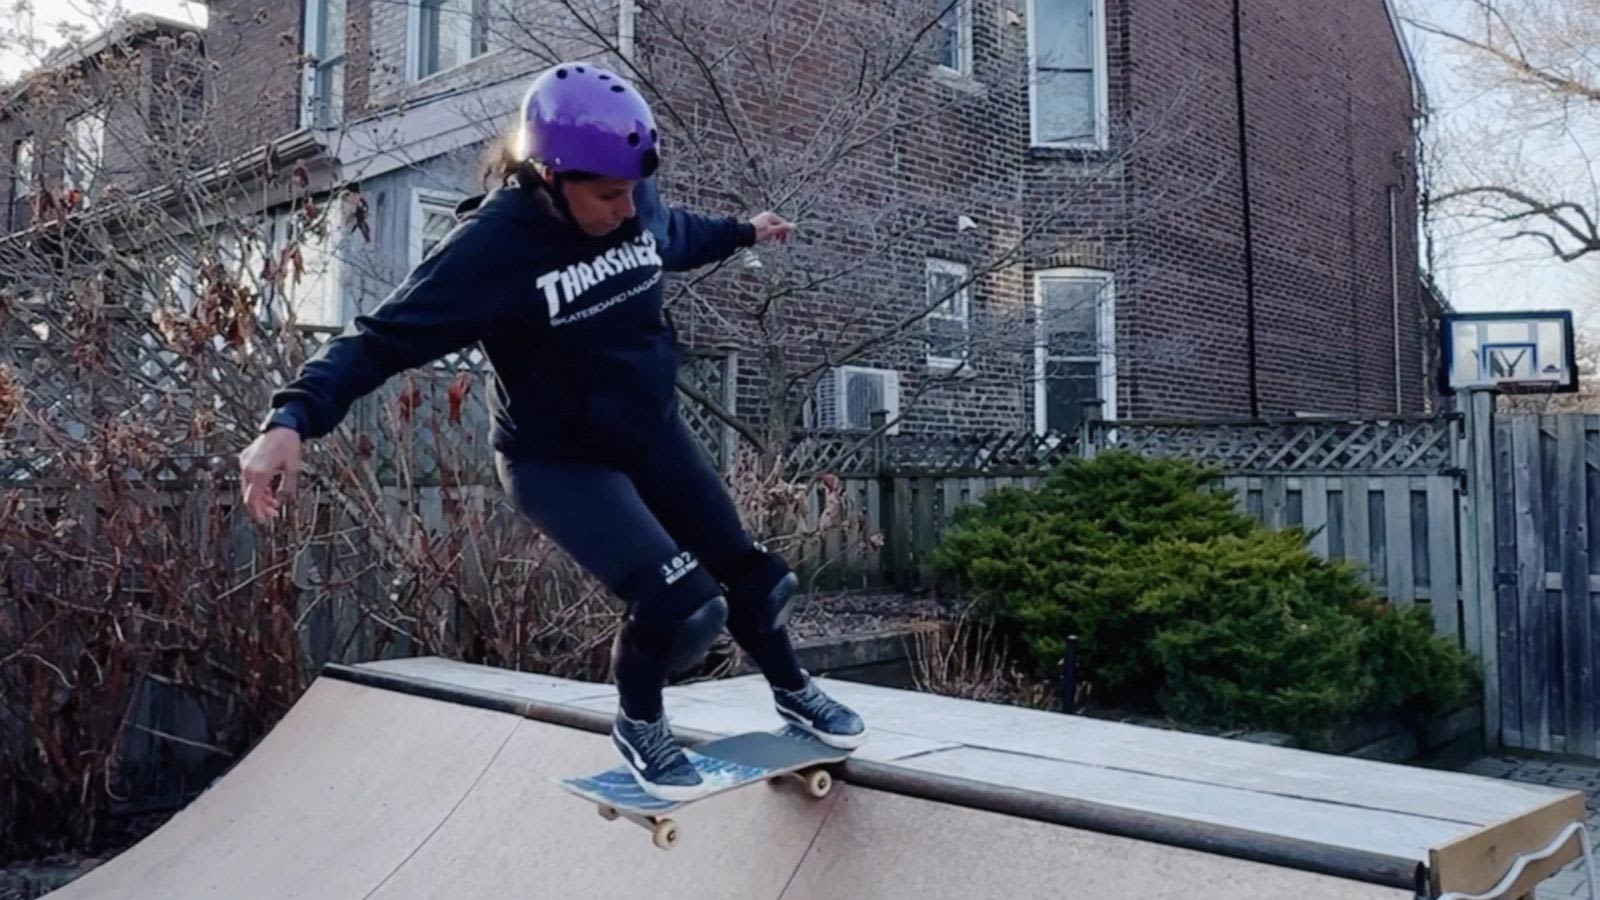 Mom of 2 begins skateboarding at 43: 'I found the fountain of youth'